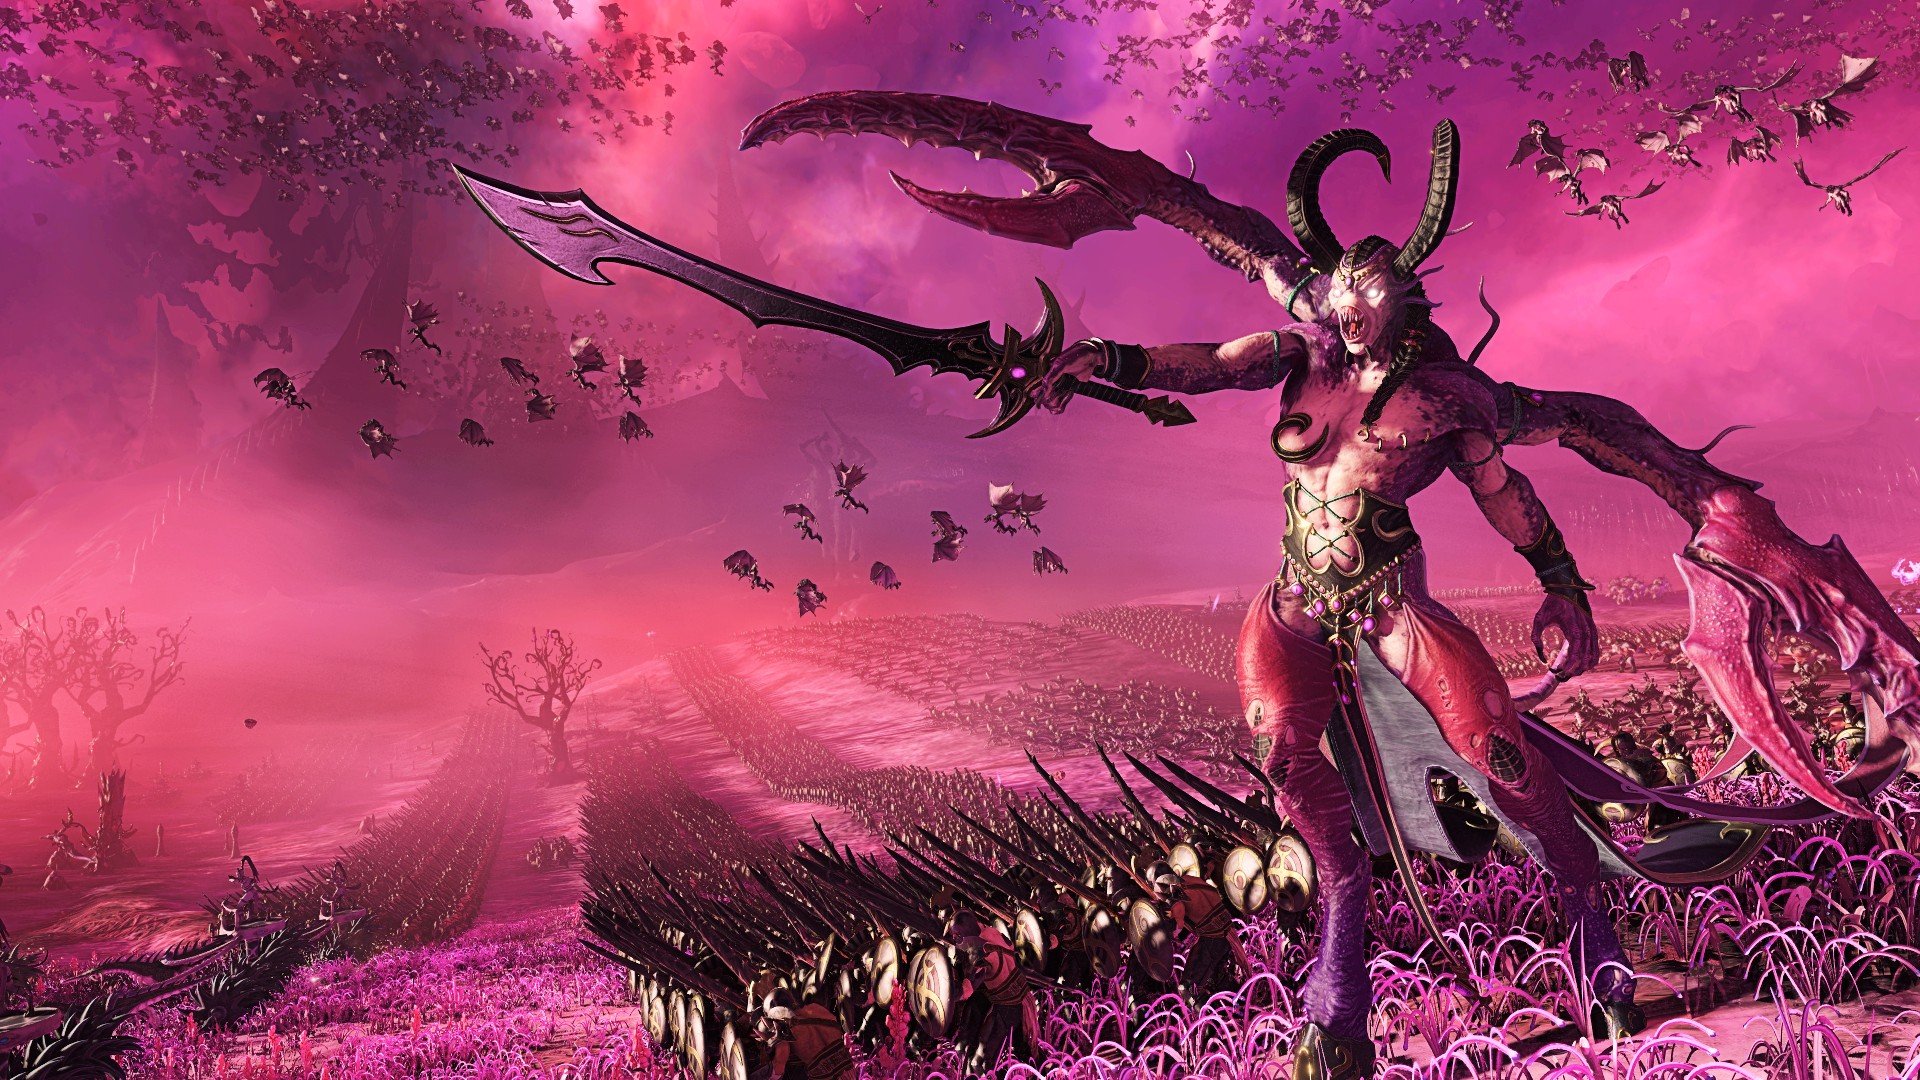 Total War: Warhammer 3's Slaanesh wants you to embrace your kinks